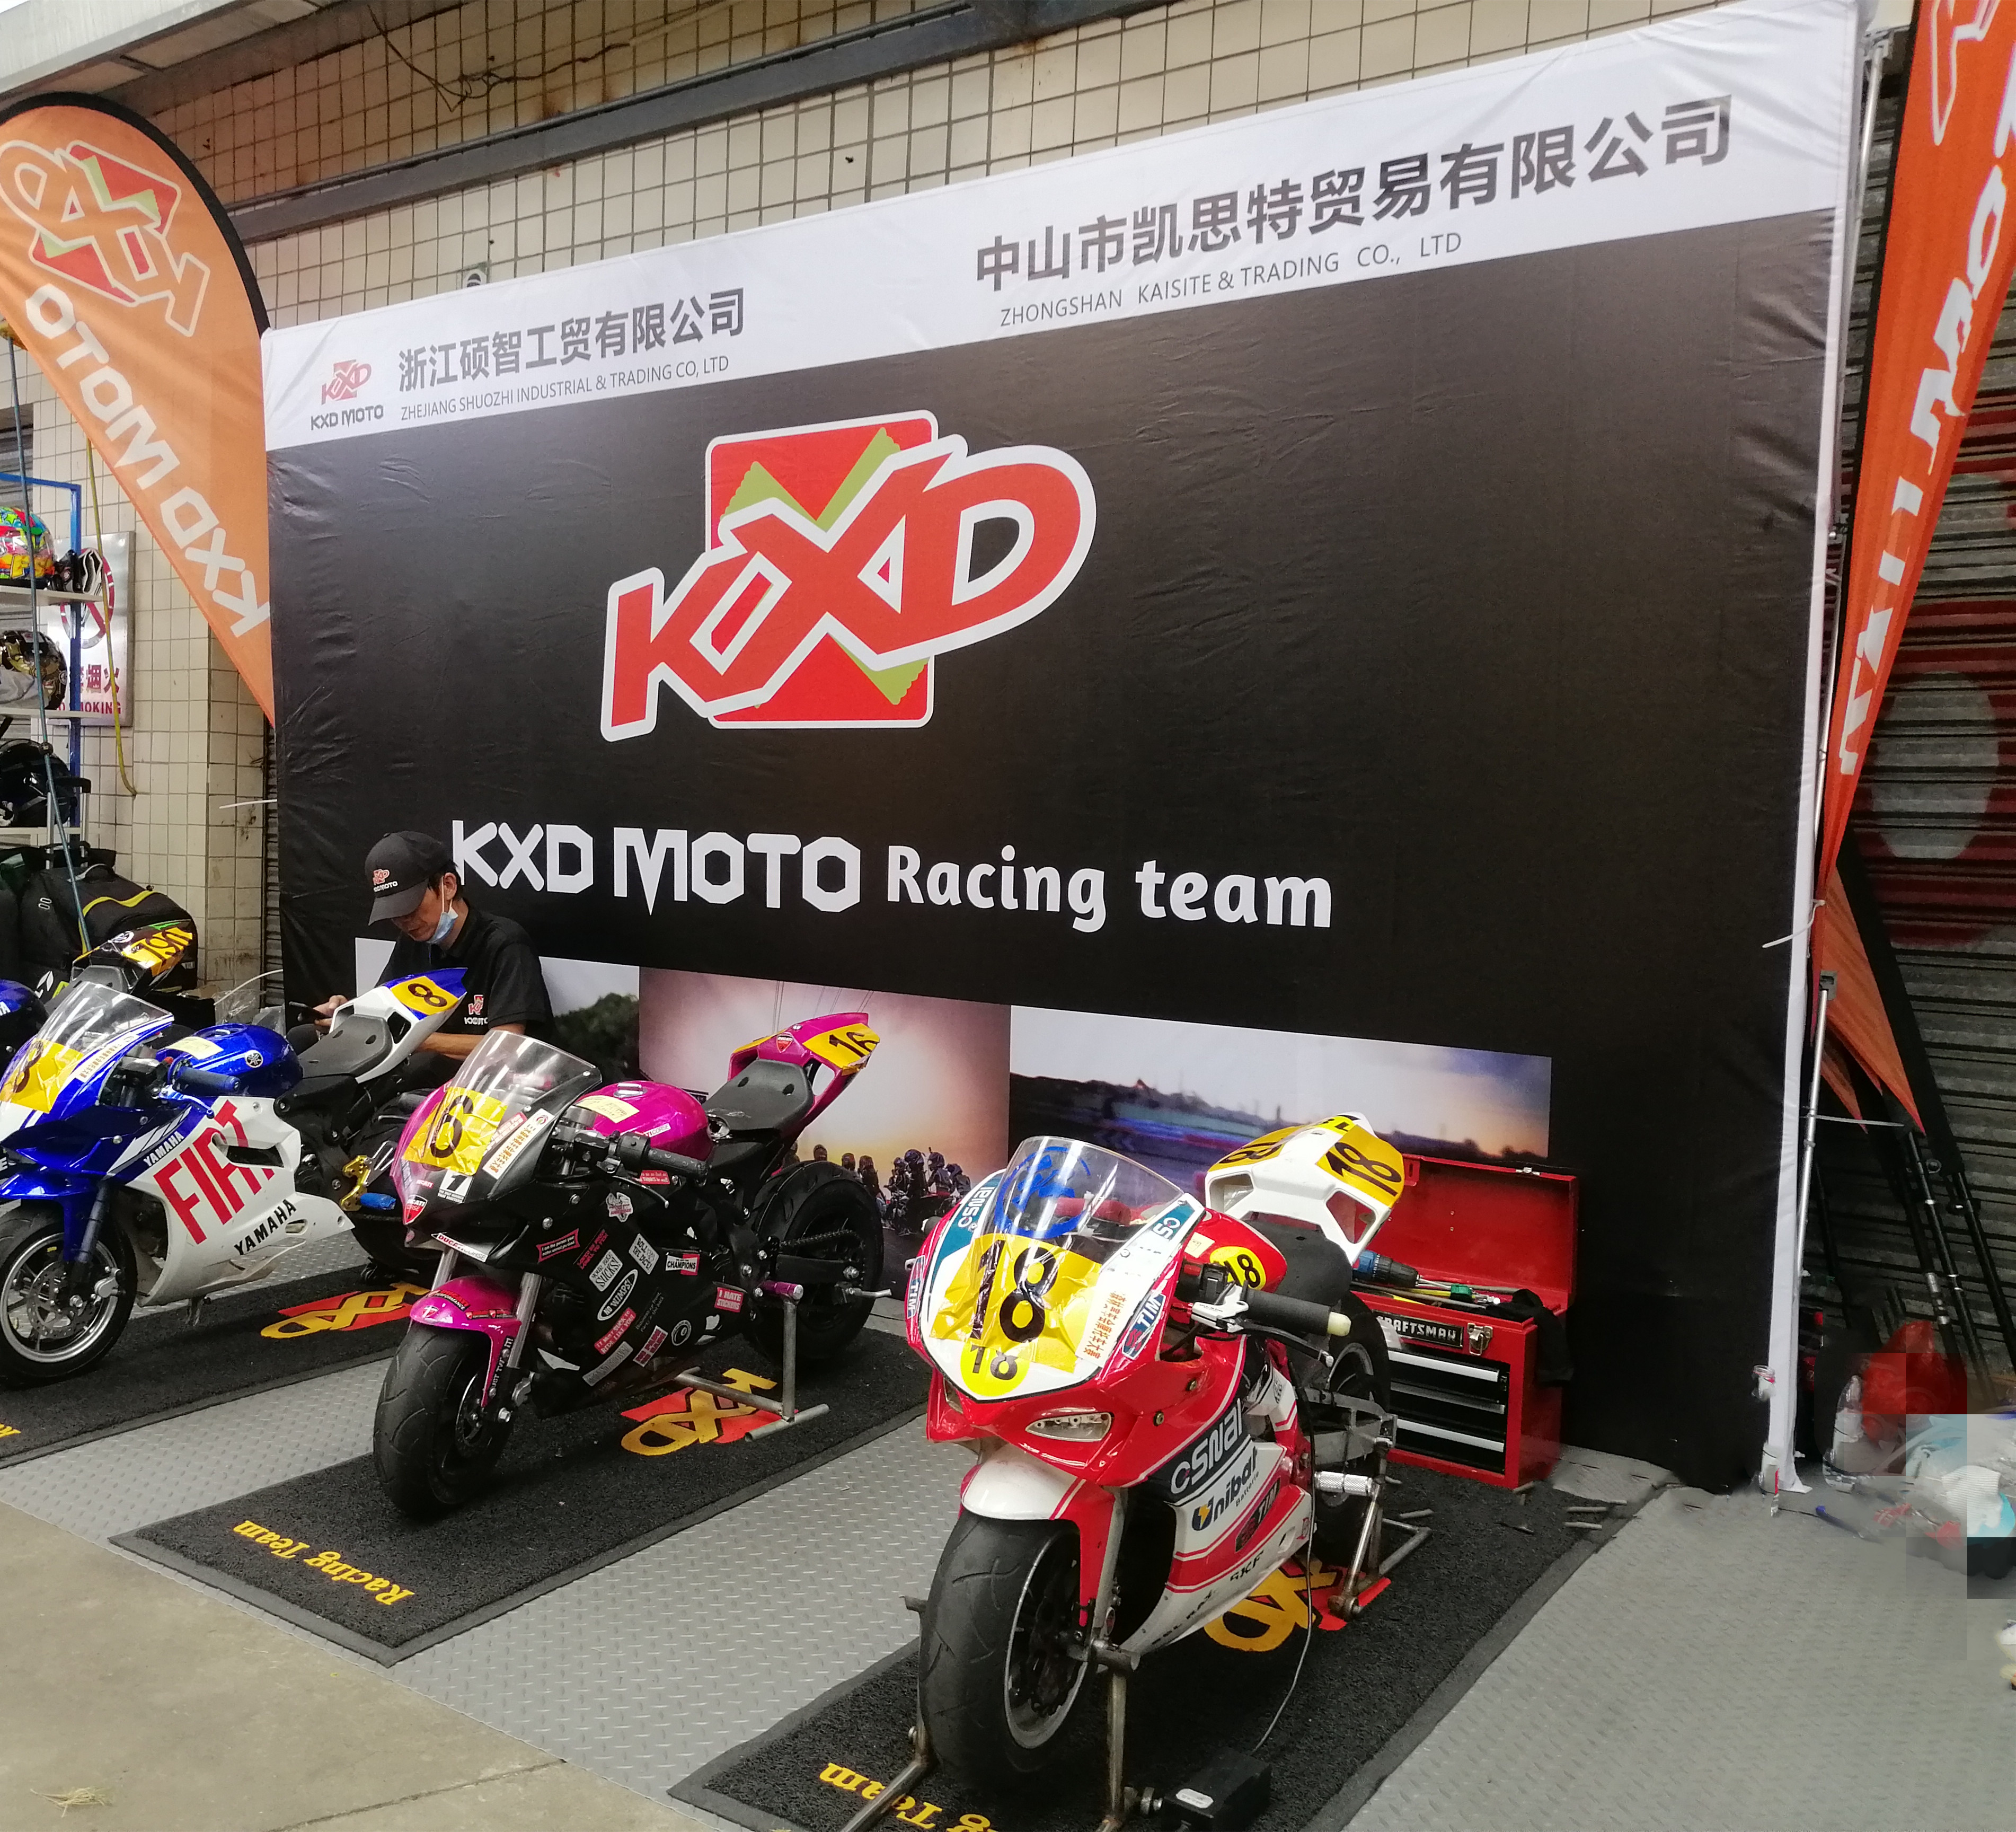 In 2020, KXDMOTO racer won the third place in Sanshui Forest Motorcycle Race